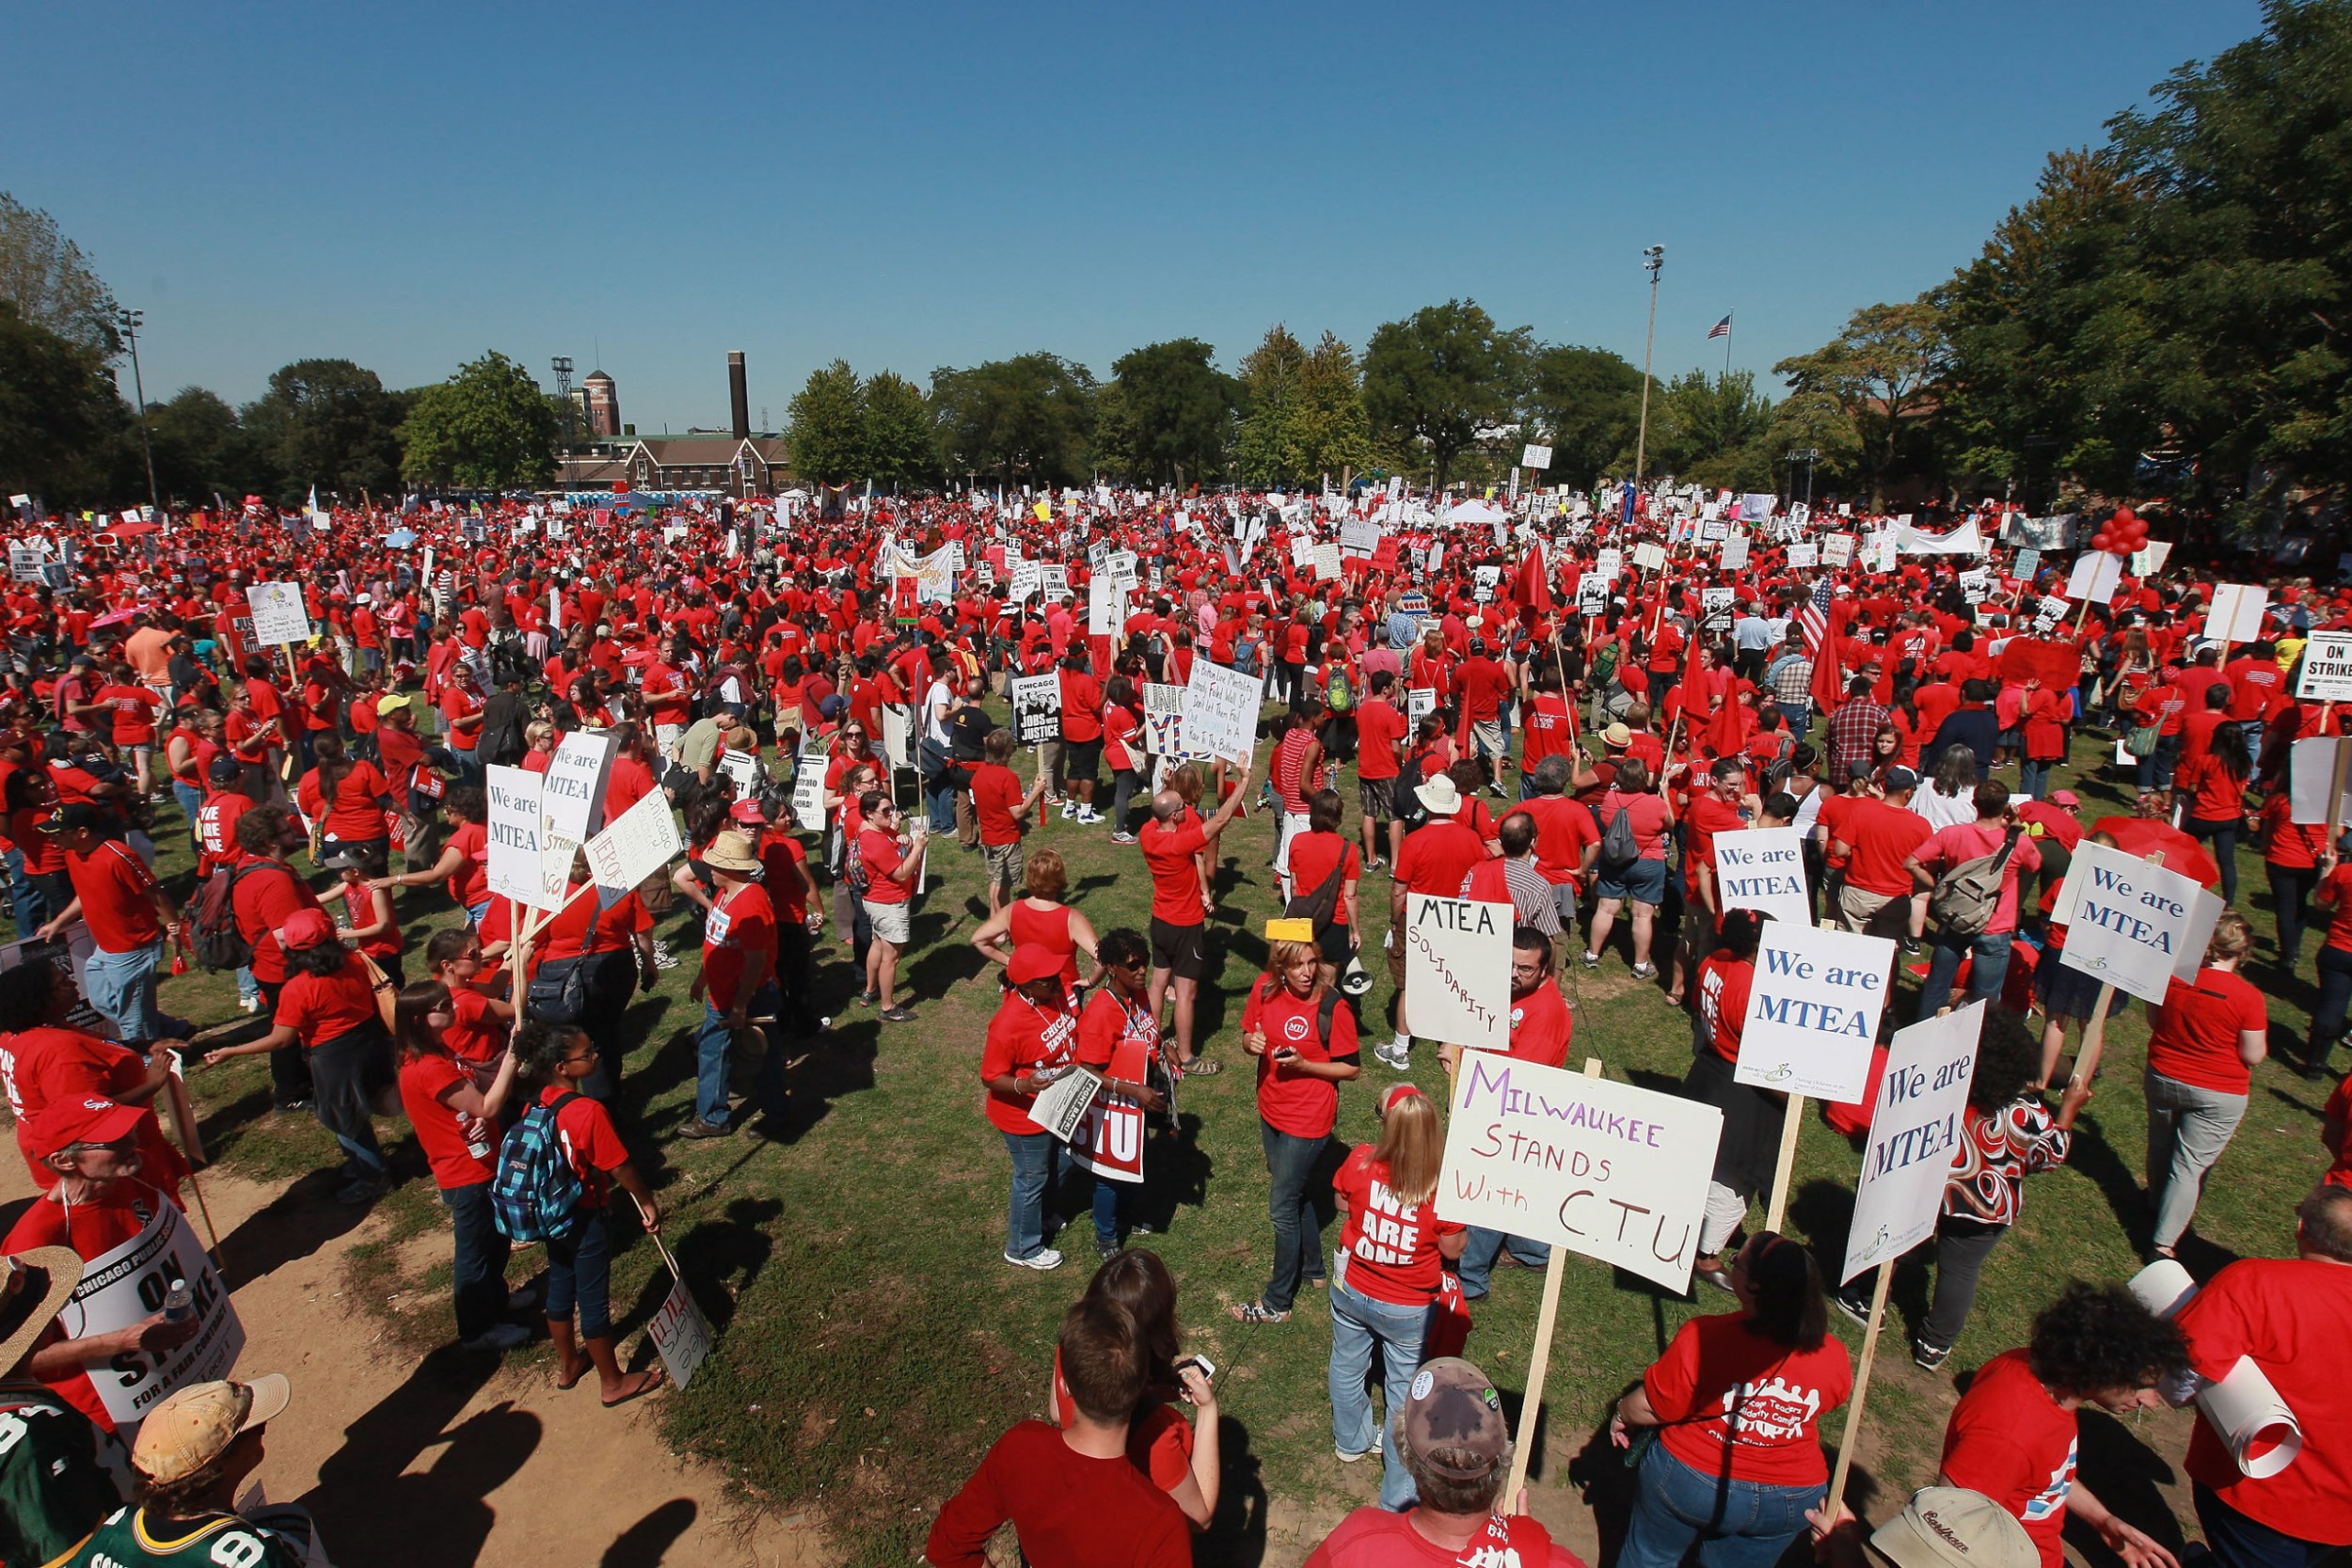 Striking Chicago teachers and their supporters attend a rally in support of better compensation, benefits, and job security, September 2012. (Getty/Scott Olson)